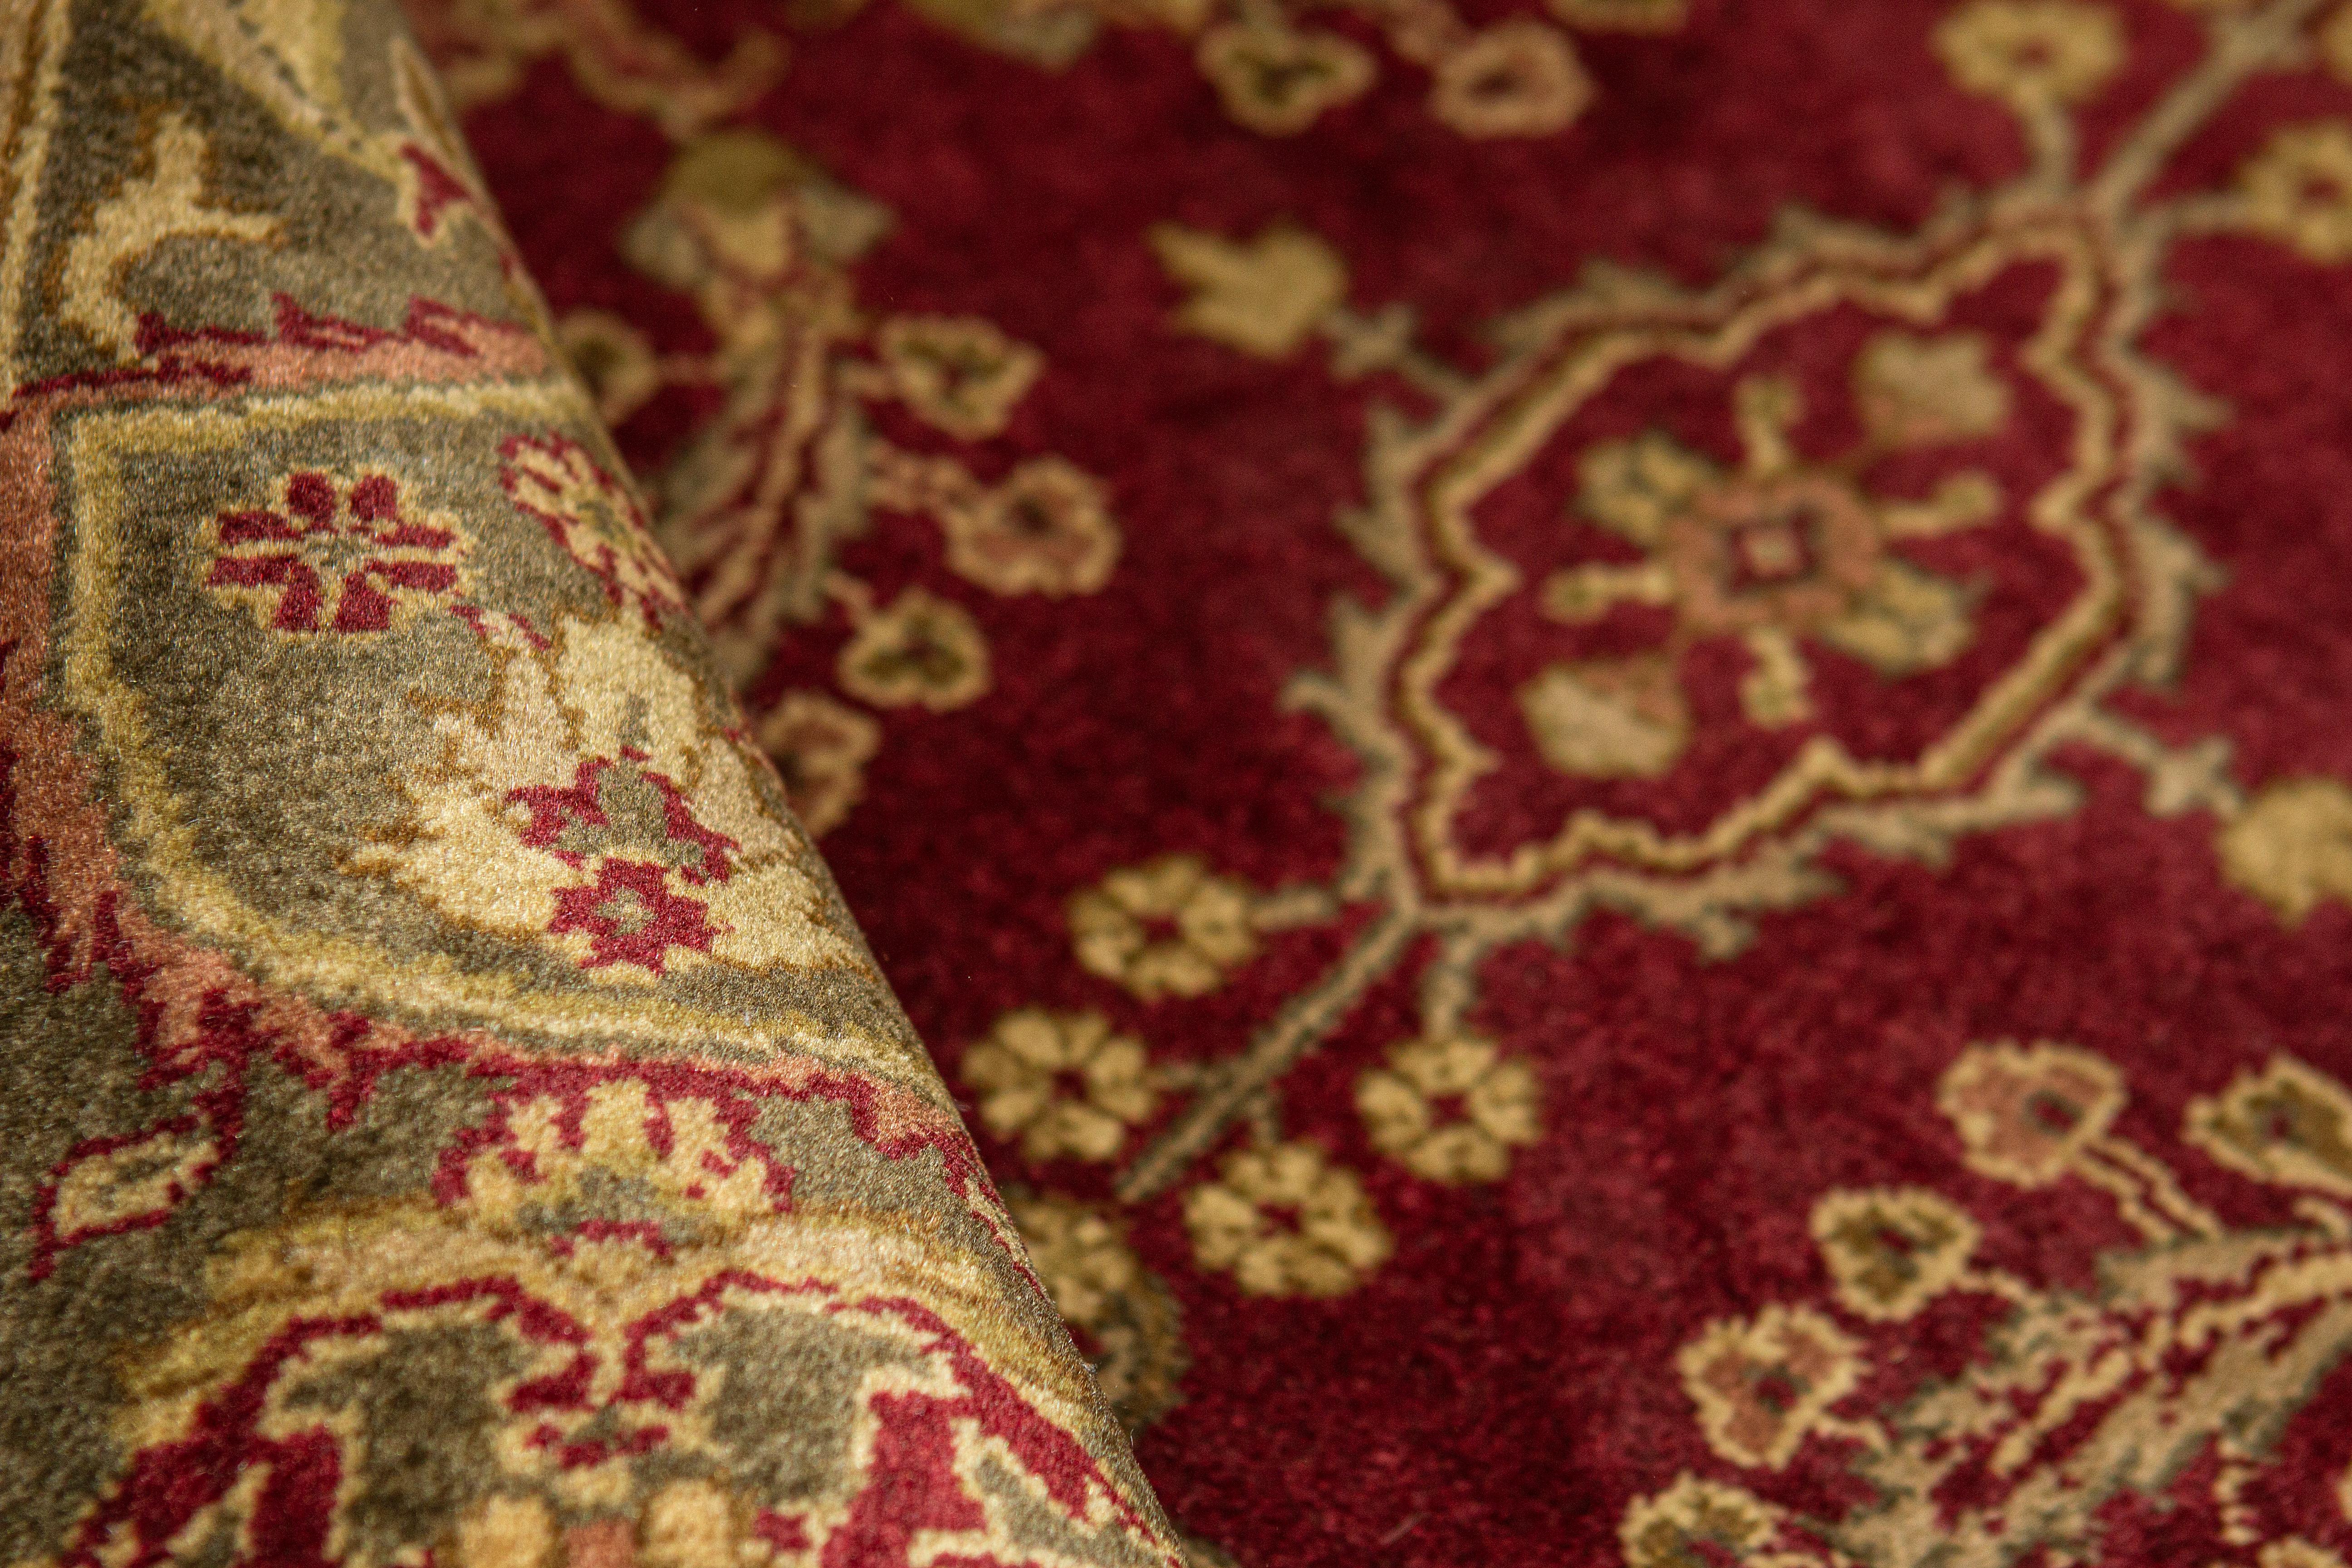 Boasting a long and storied history, antique rugs and carpets that were woven in India are among the more intriguing of all oriental rugs. The inspiration for this collection comes from authentic Oriental designs, handwoven in the traditional style.